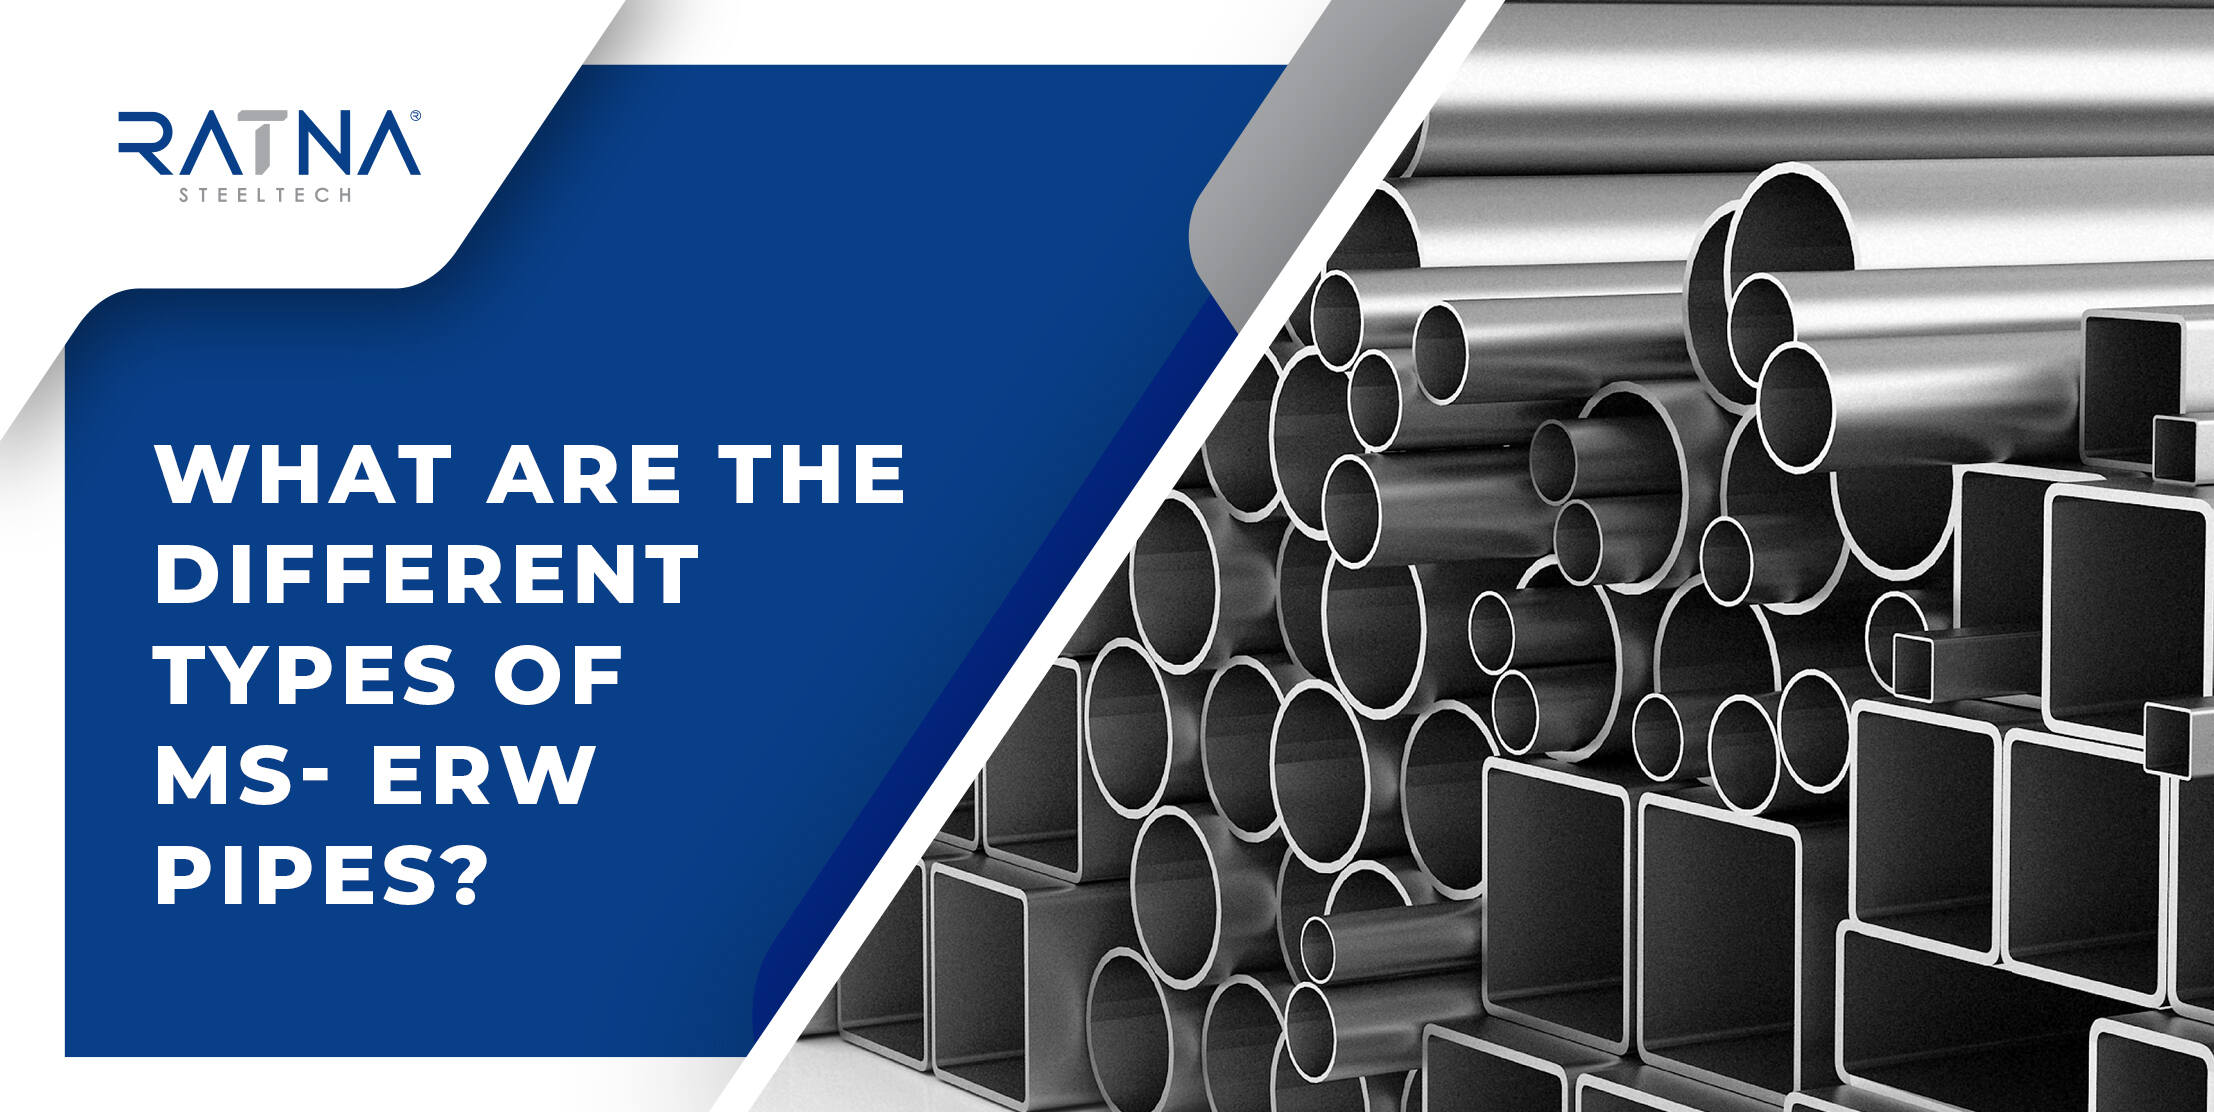 What Are The Different Types of MS-ERW Pipes?